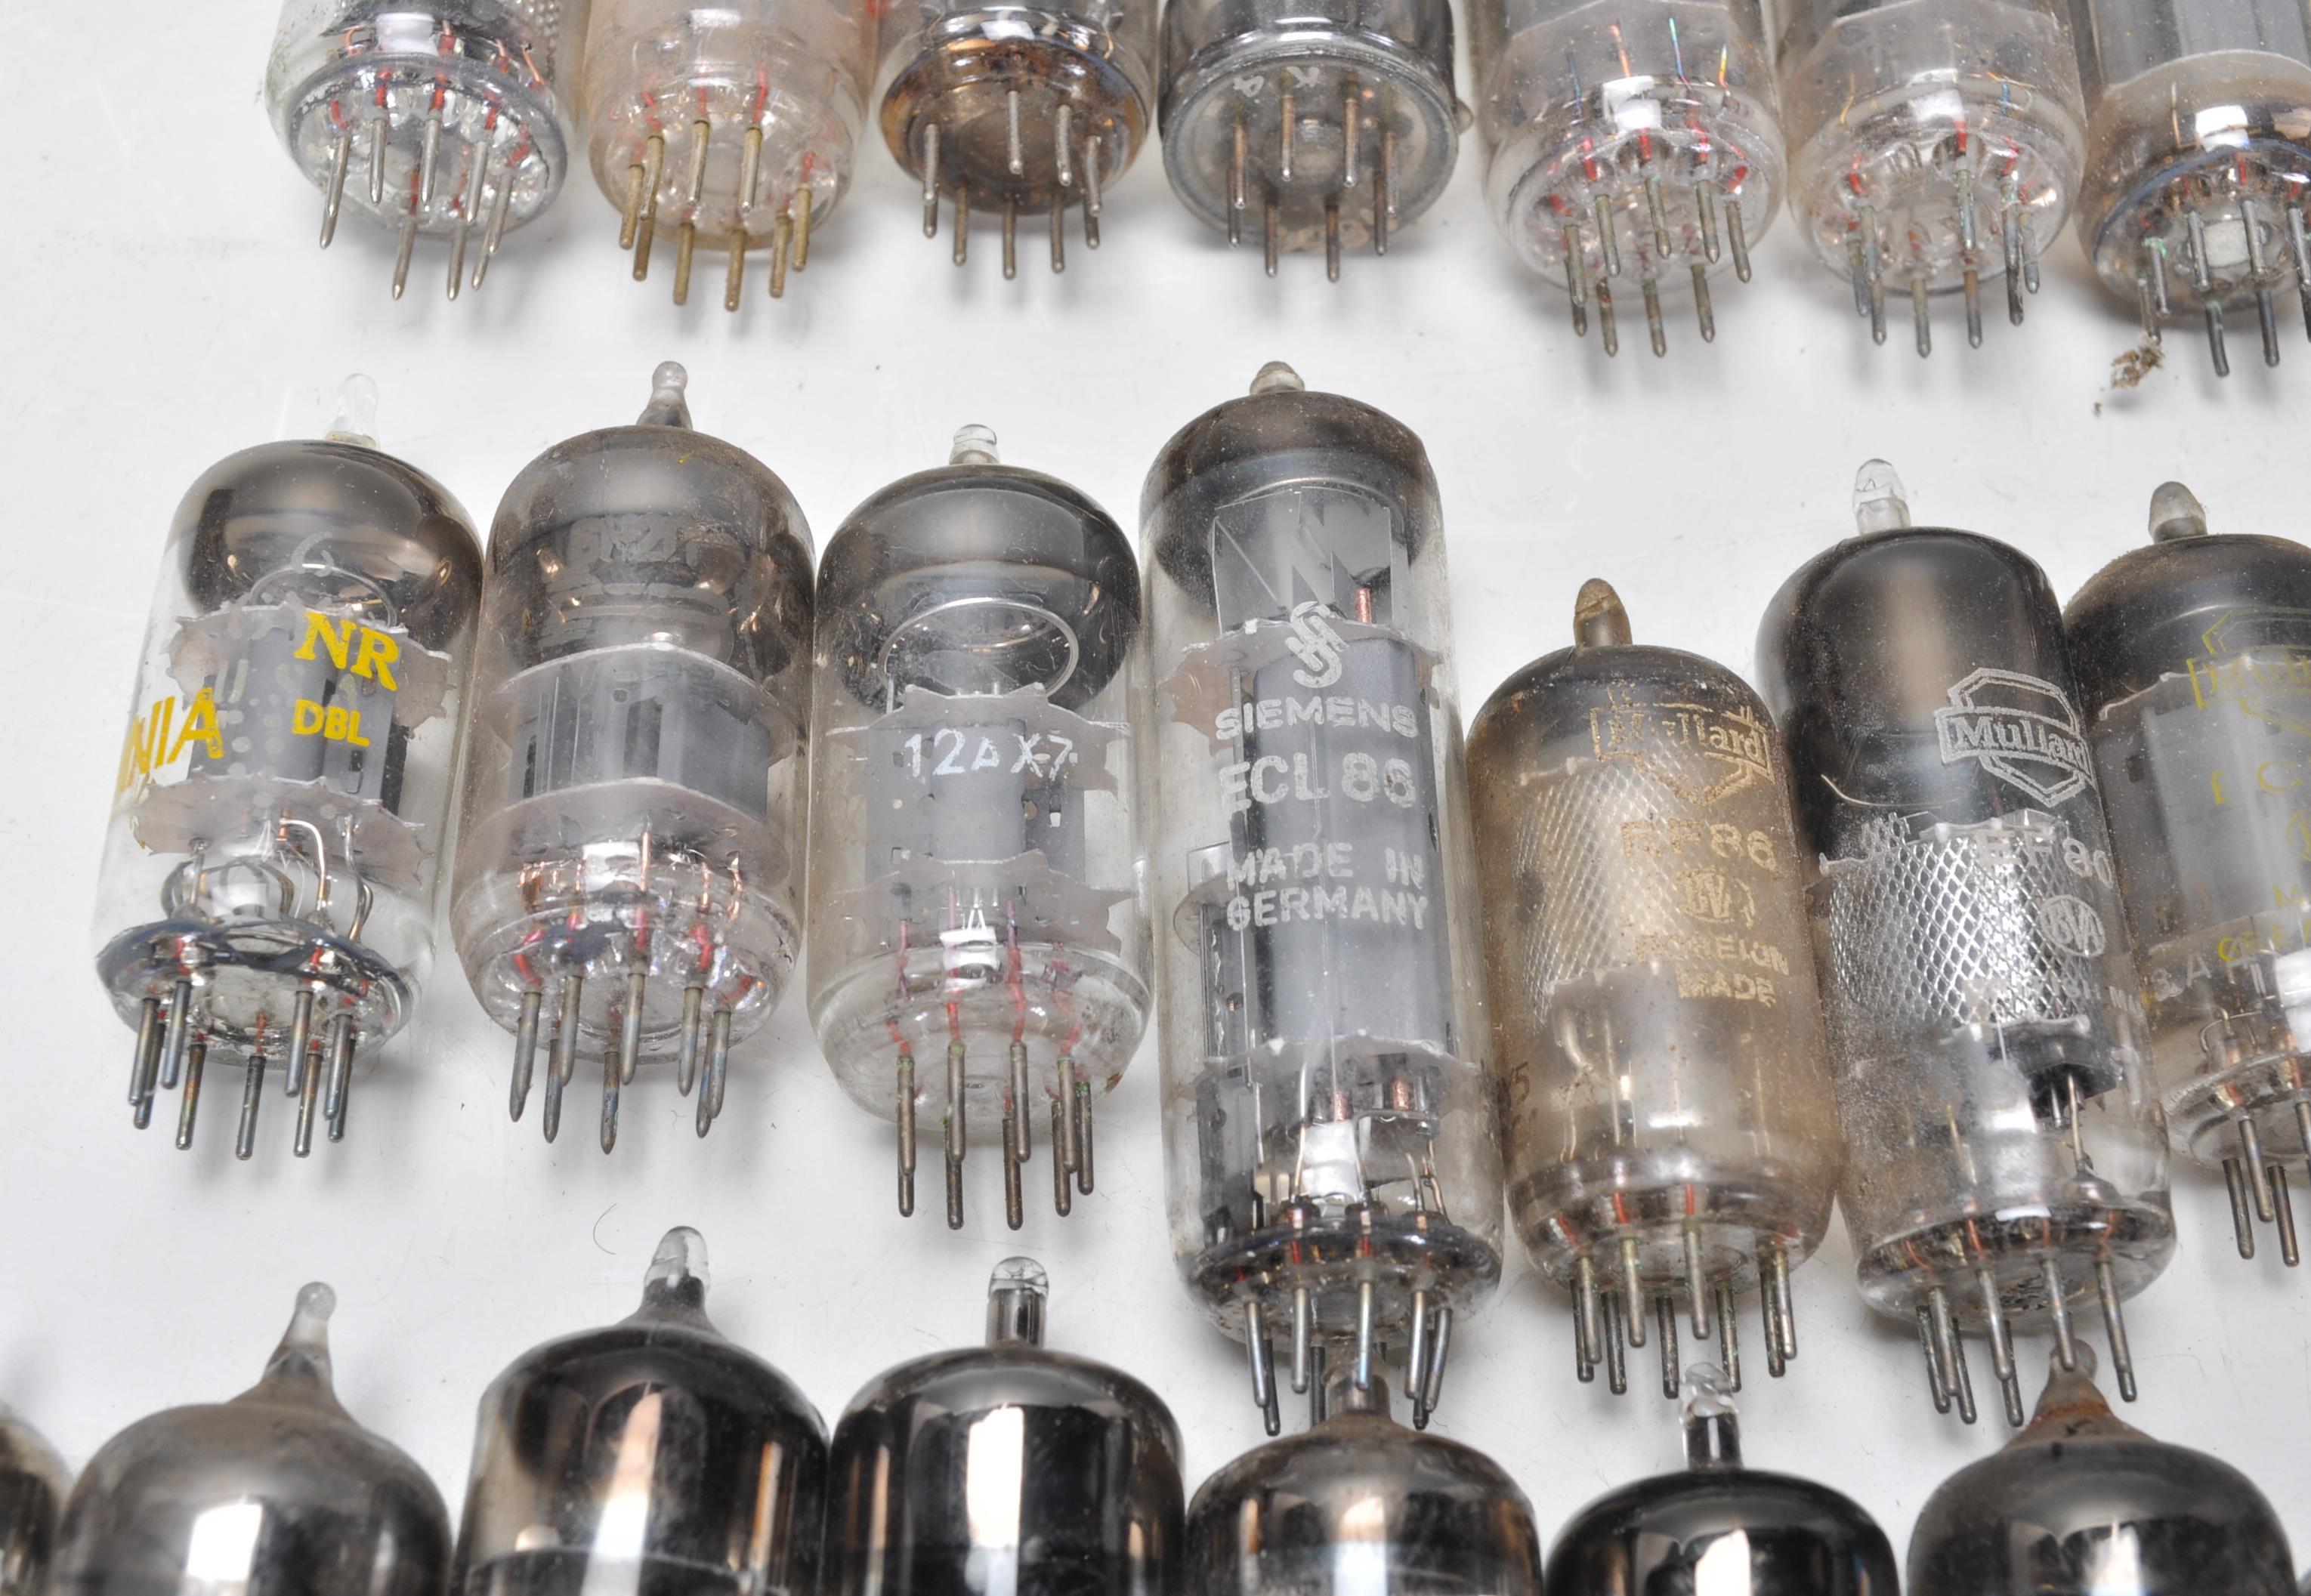 A collection of vintage mixed radio valves to include EC83, EZ81, Ediswate UCH42, Mullard EZ81 - Image 11 of 21